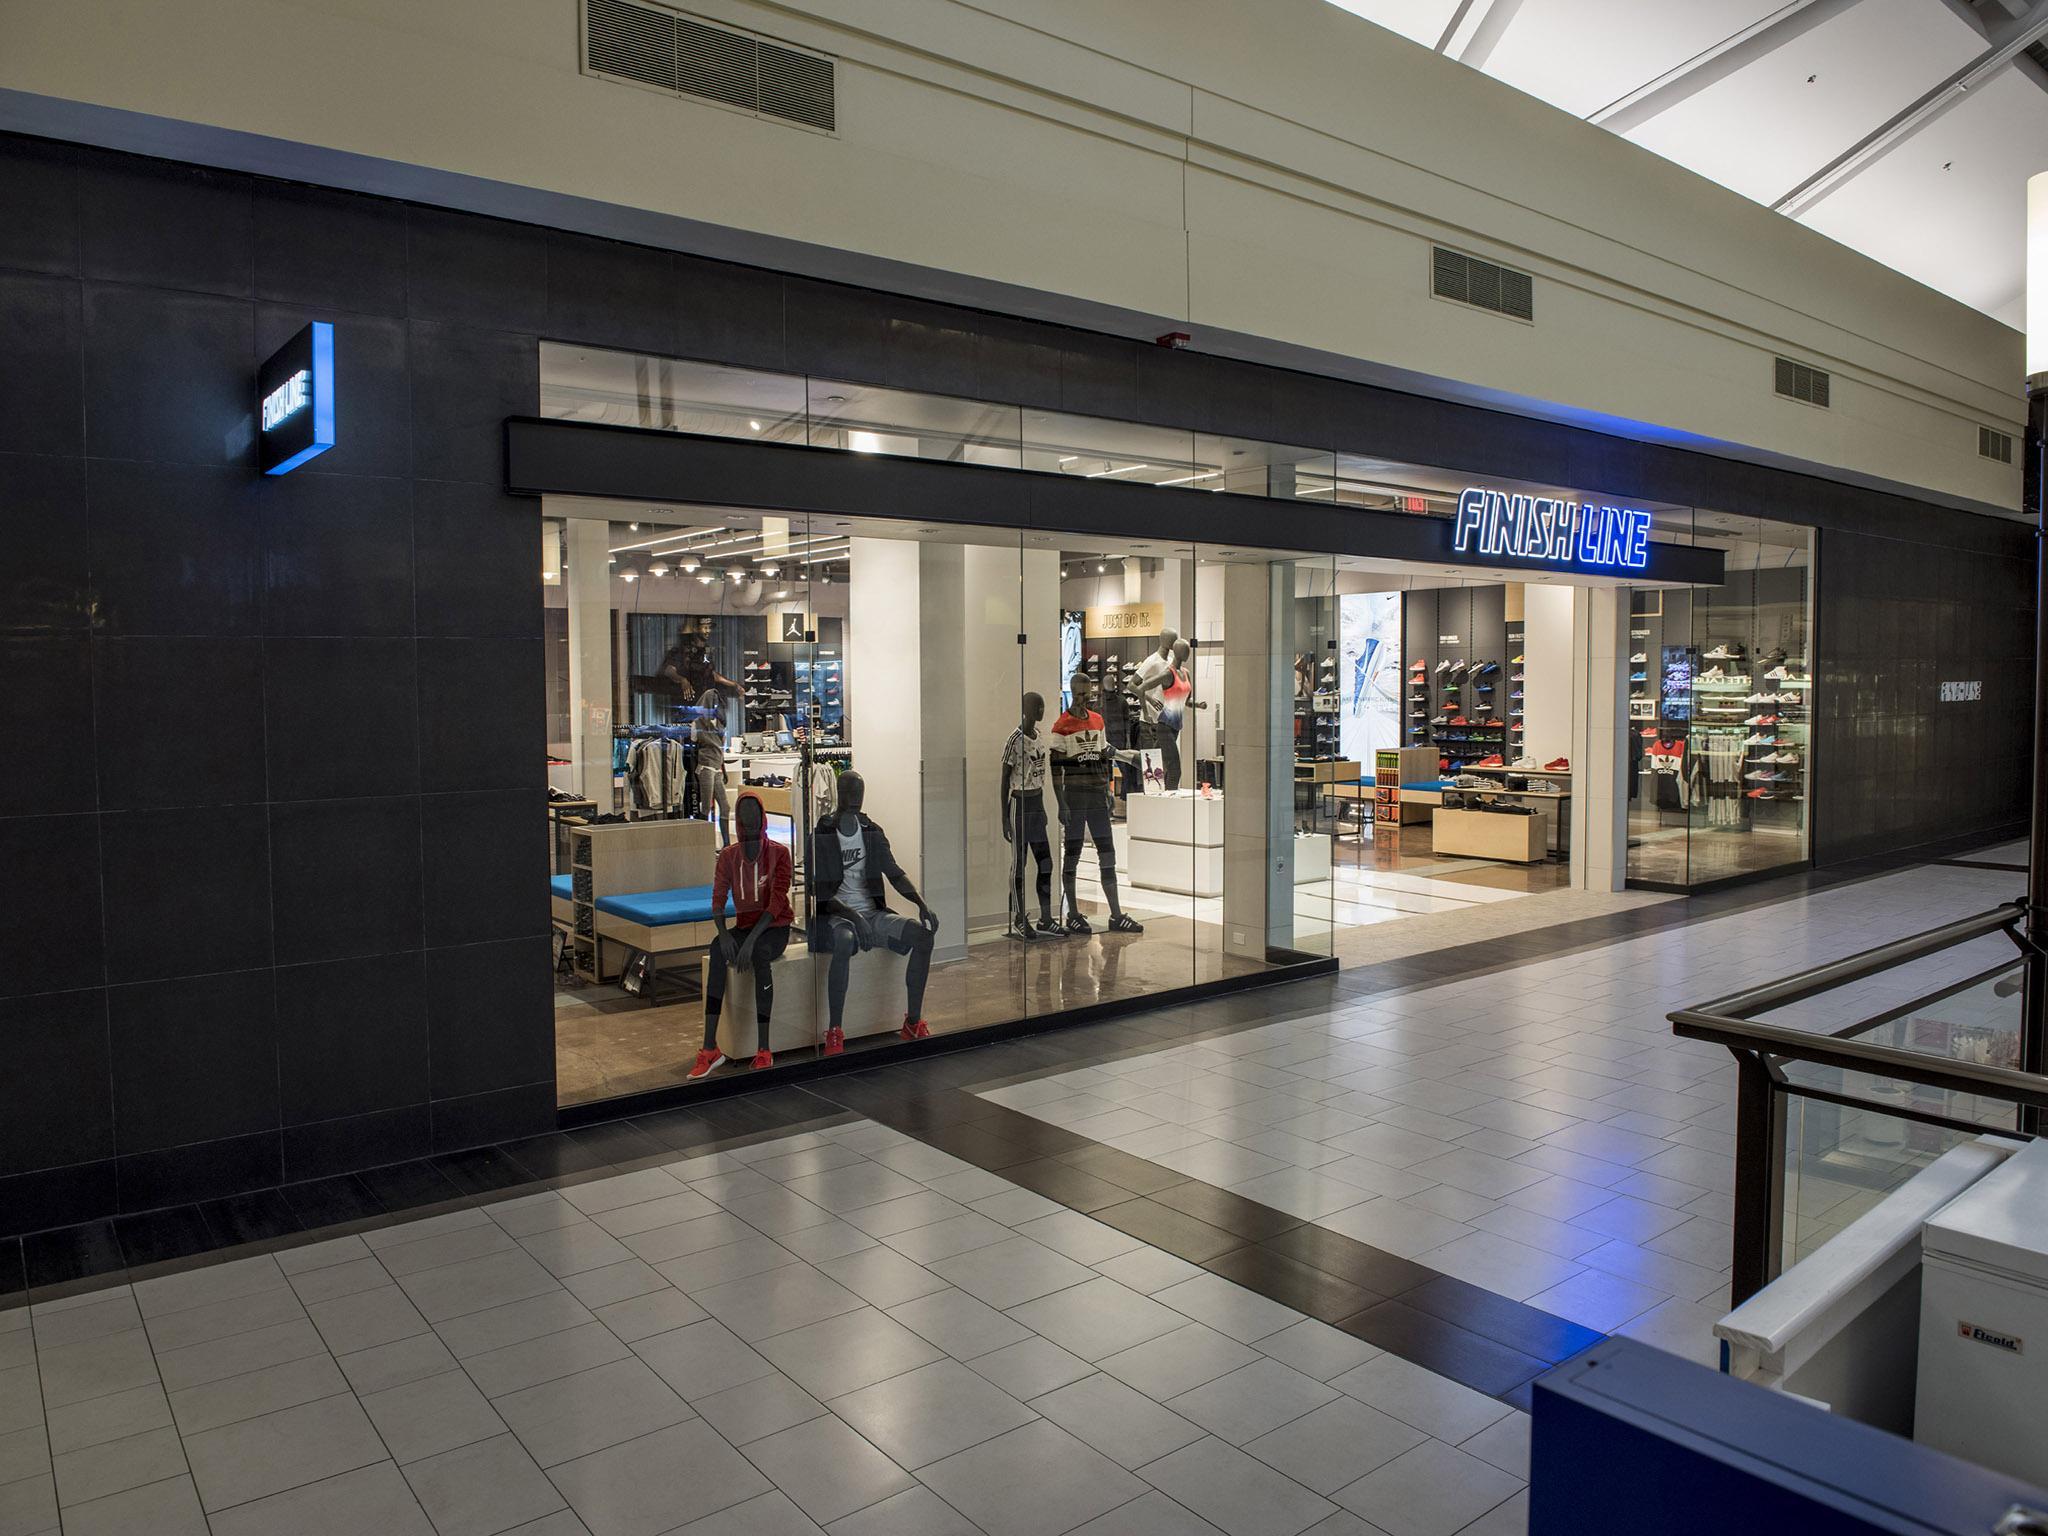 JD Sports is buying US retailer Finish Line